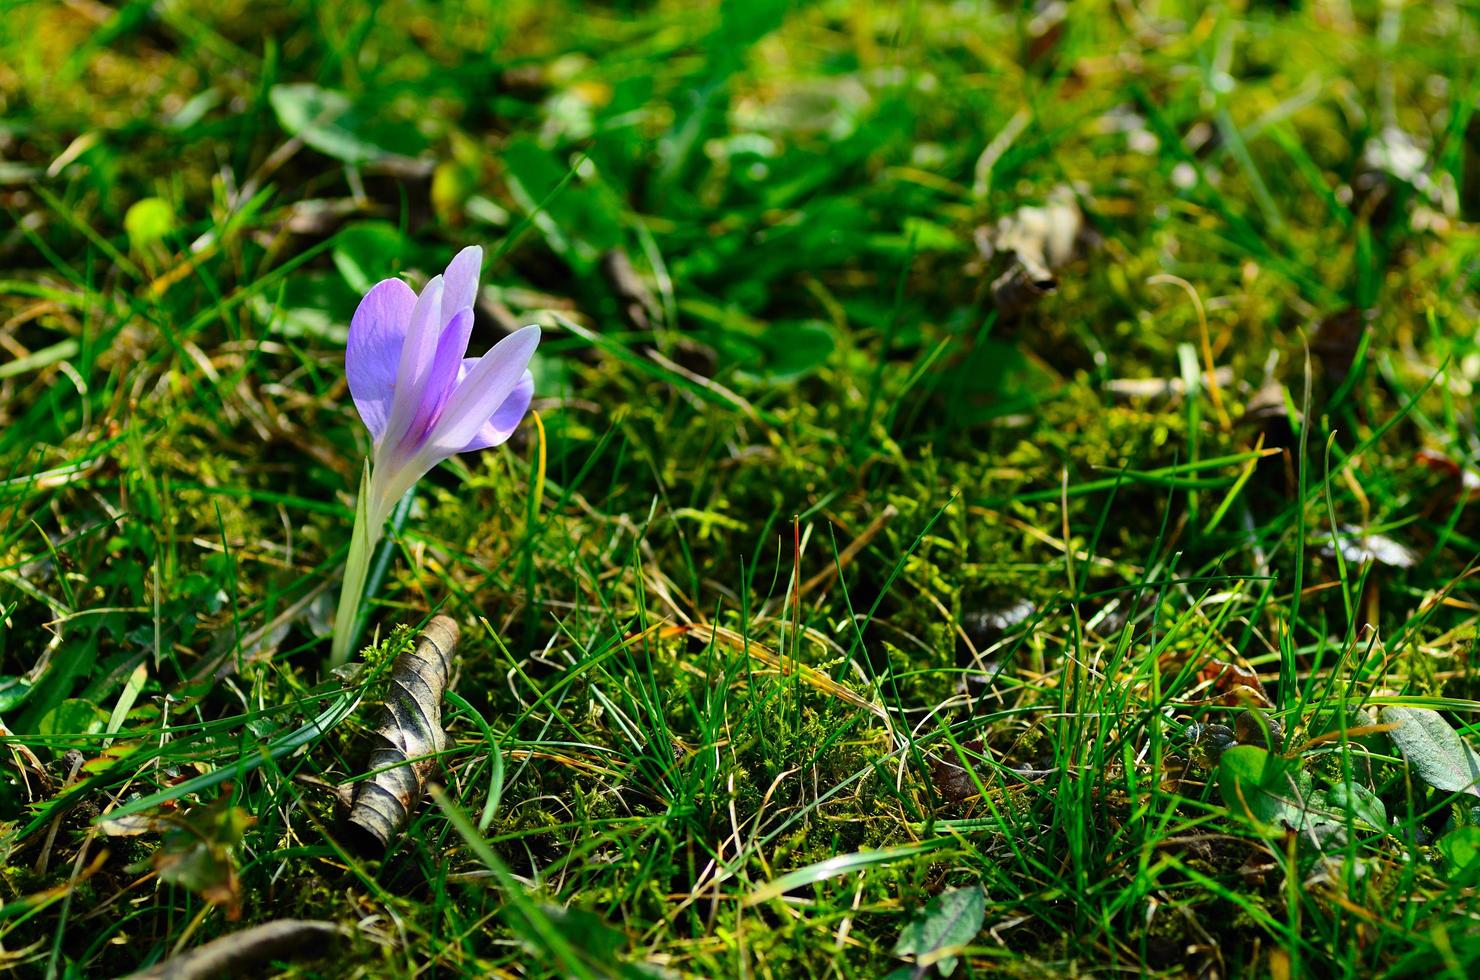 lilac crocus in the grass photo